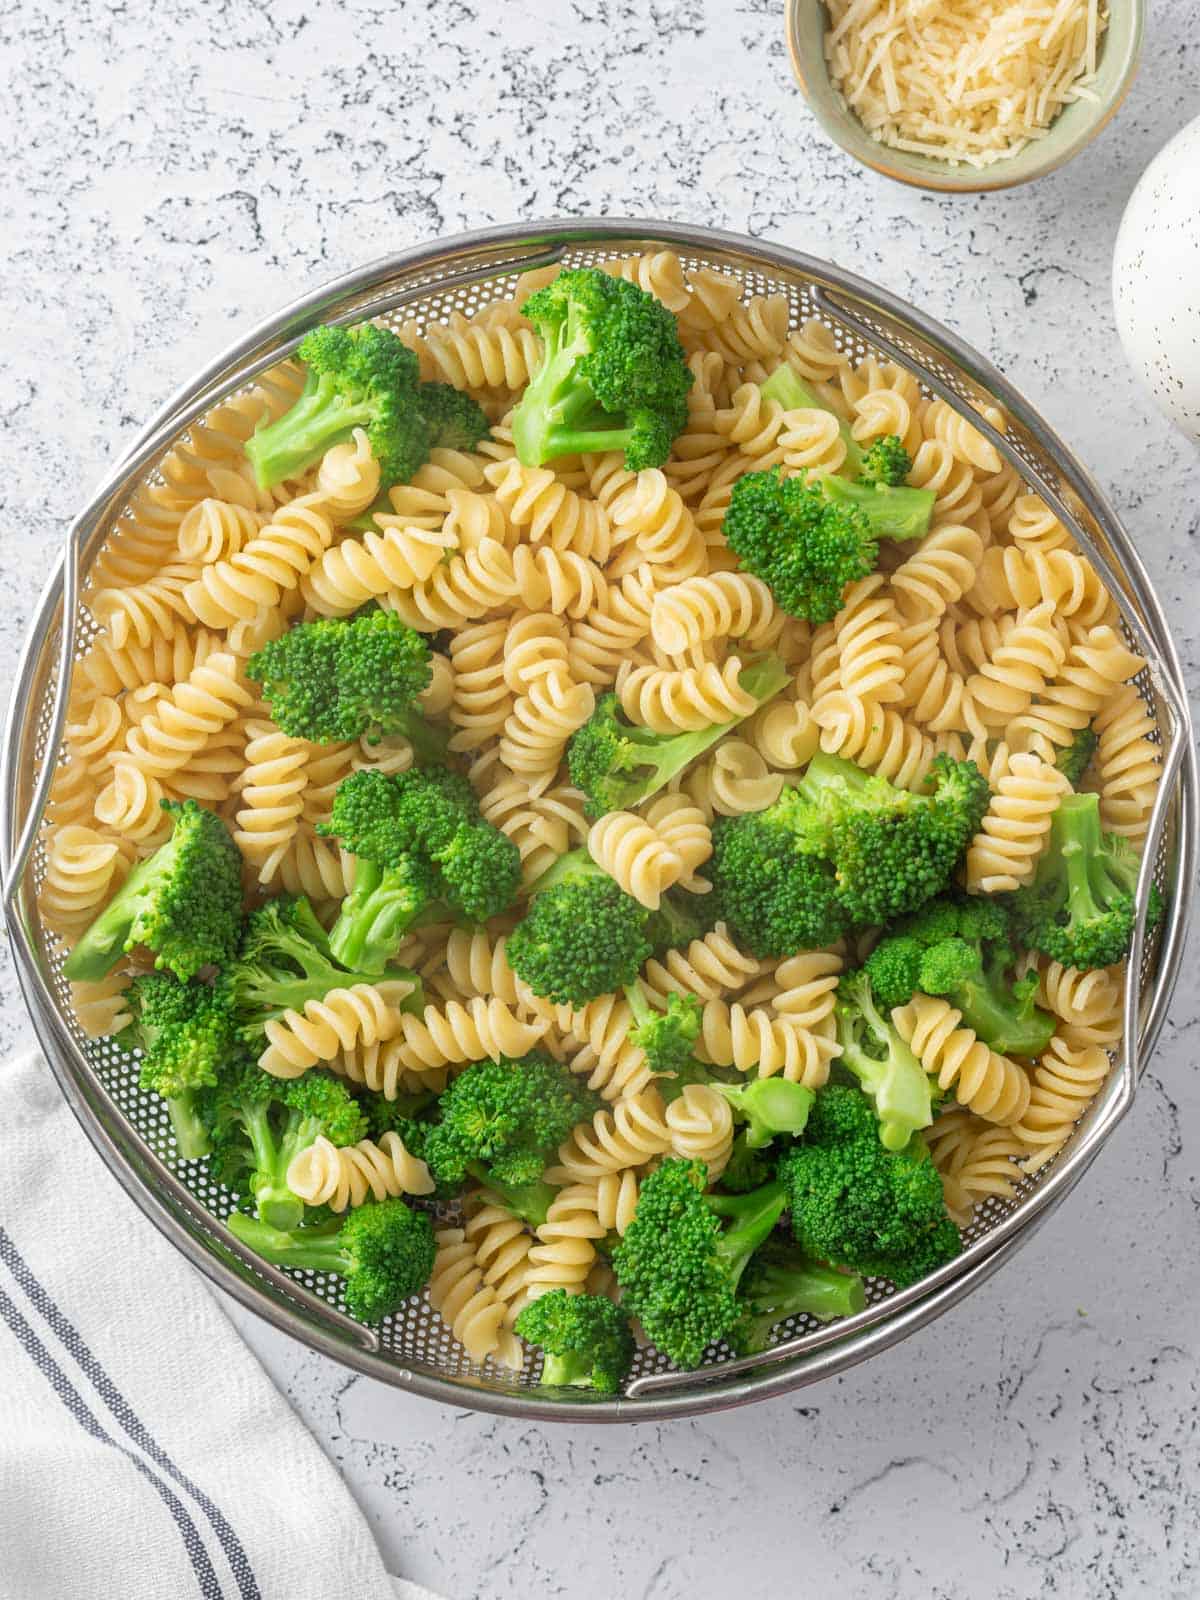 steamed broccoli and pasta